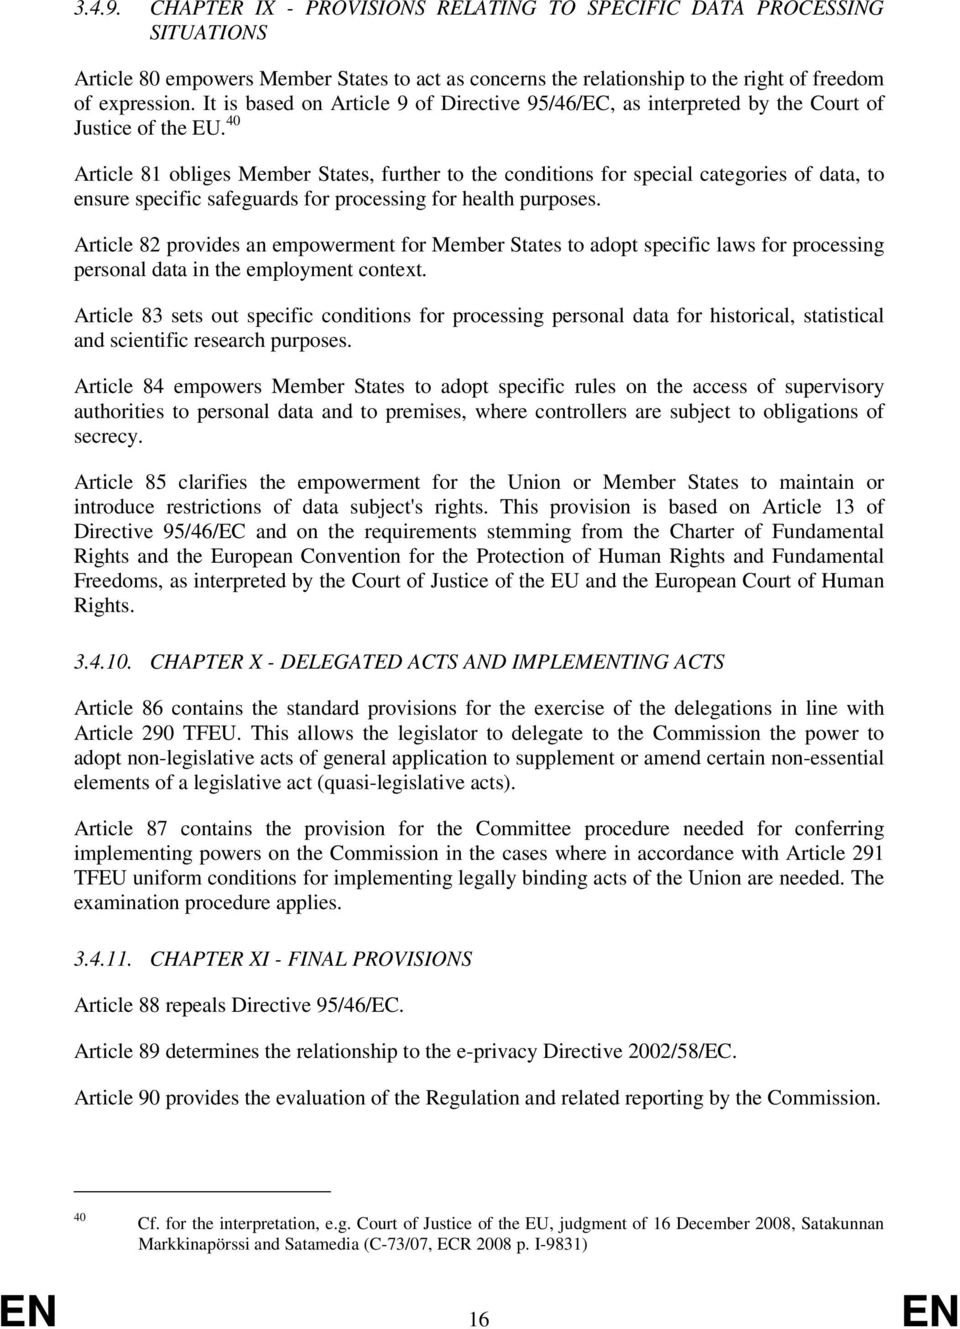 40 Article 81 obliges Member States, further to the conditions for special categories of data, to ensure specific safeguards for processing for health purposes.